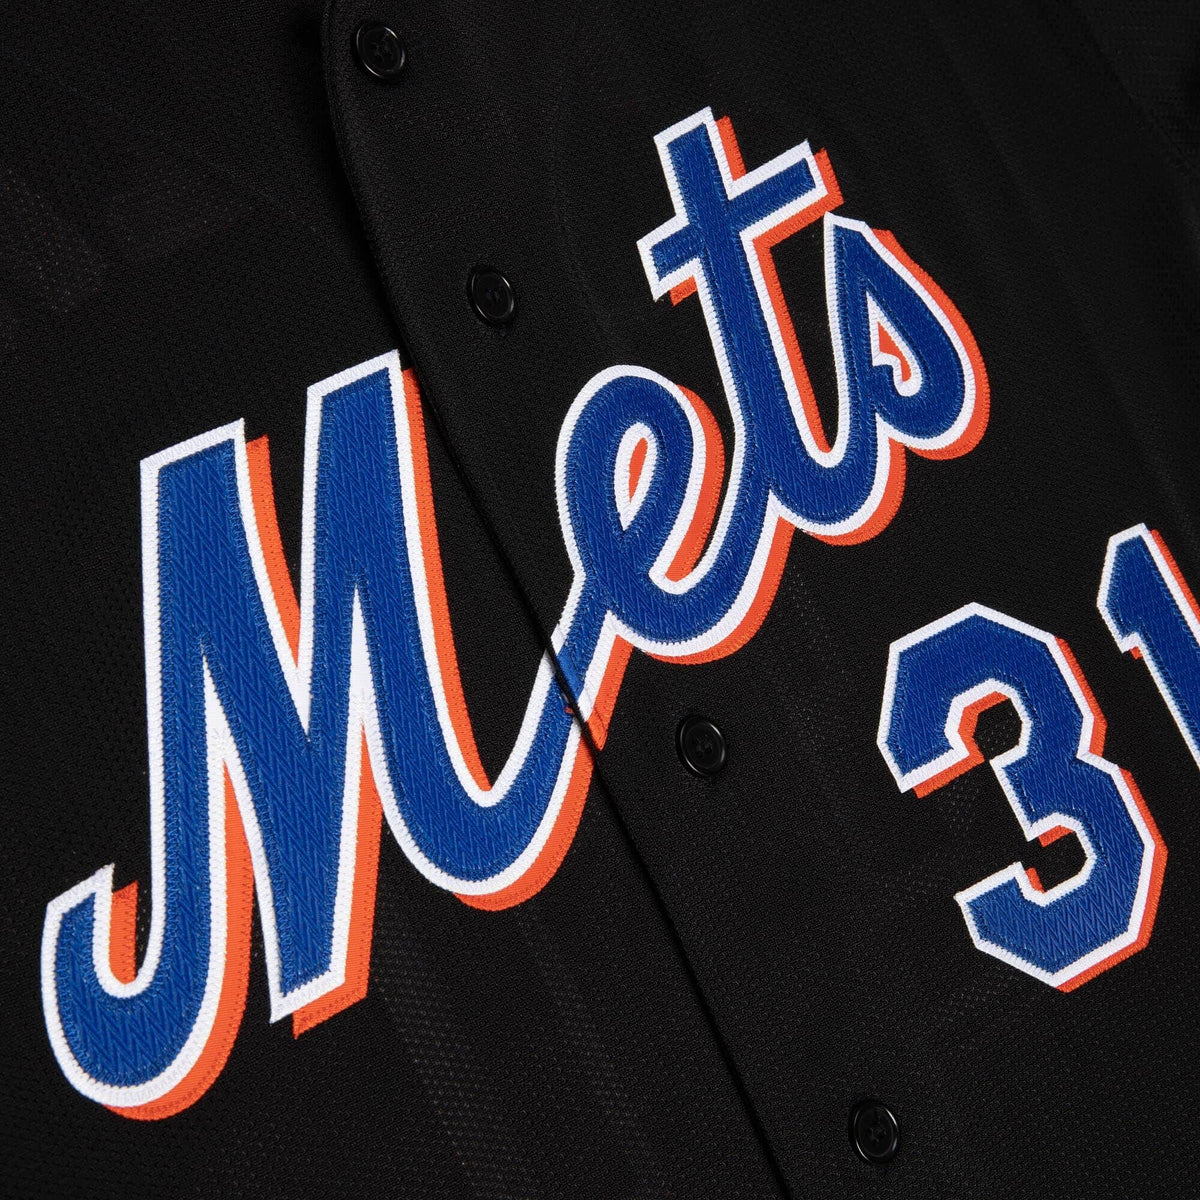 Mike Piazza 2000 Authentic Mesh BP Jersey New York Mets